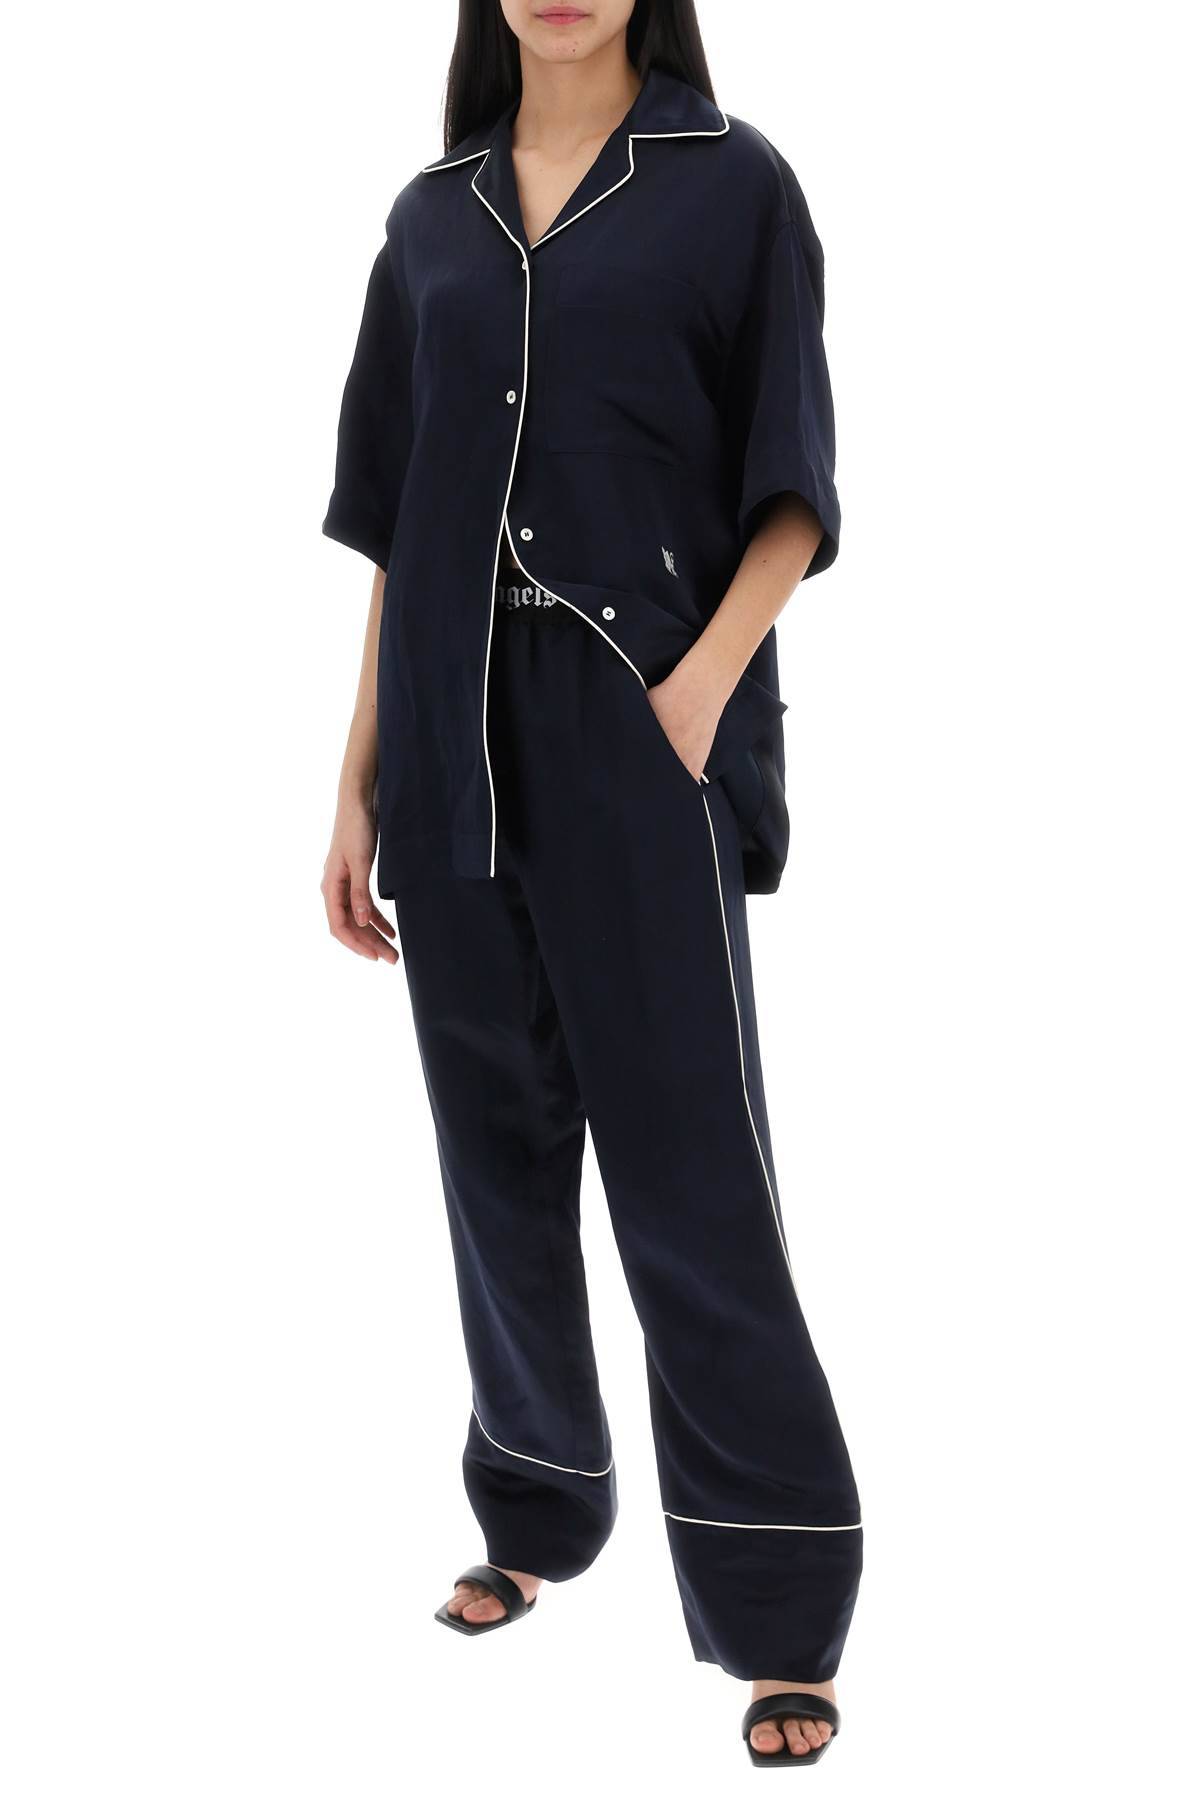 Shop Palm Angels Satin Pajama Pants For In Blue